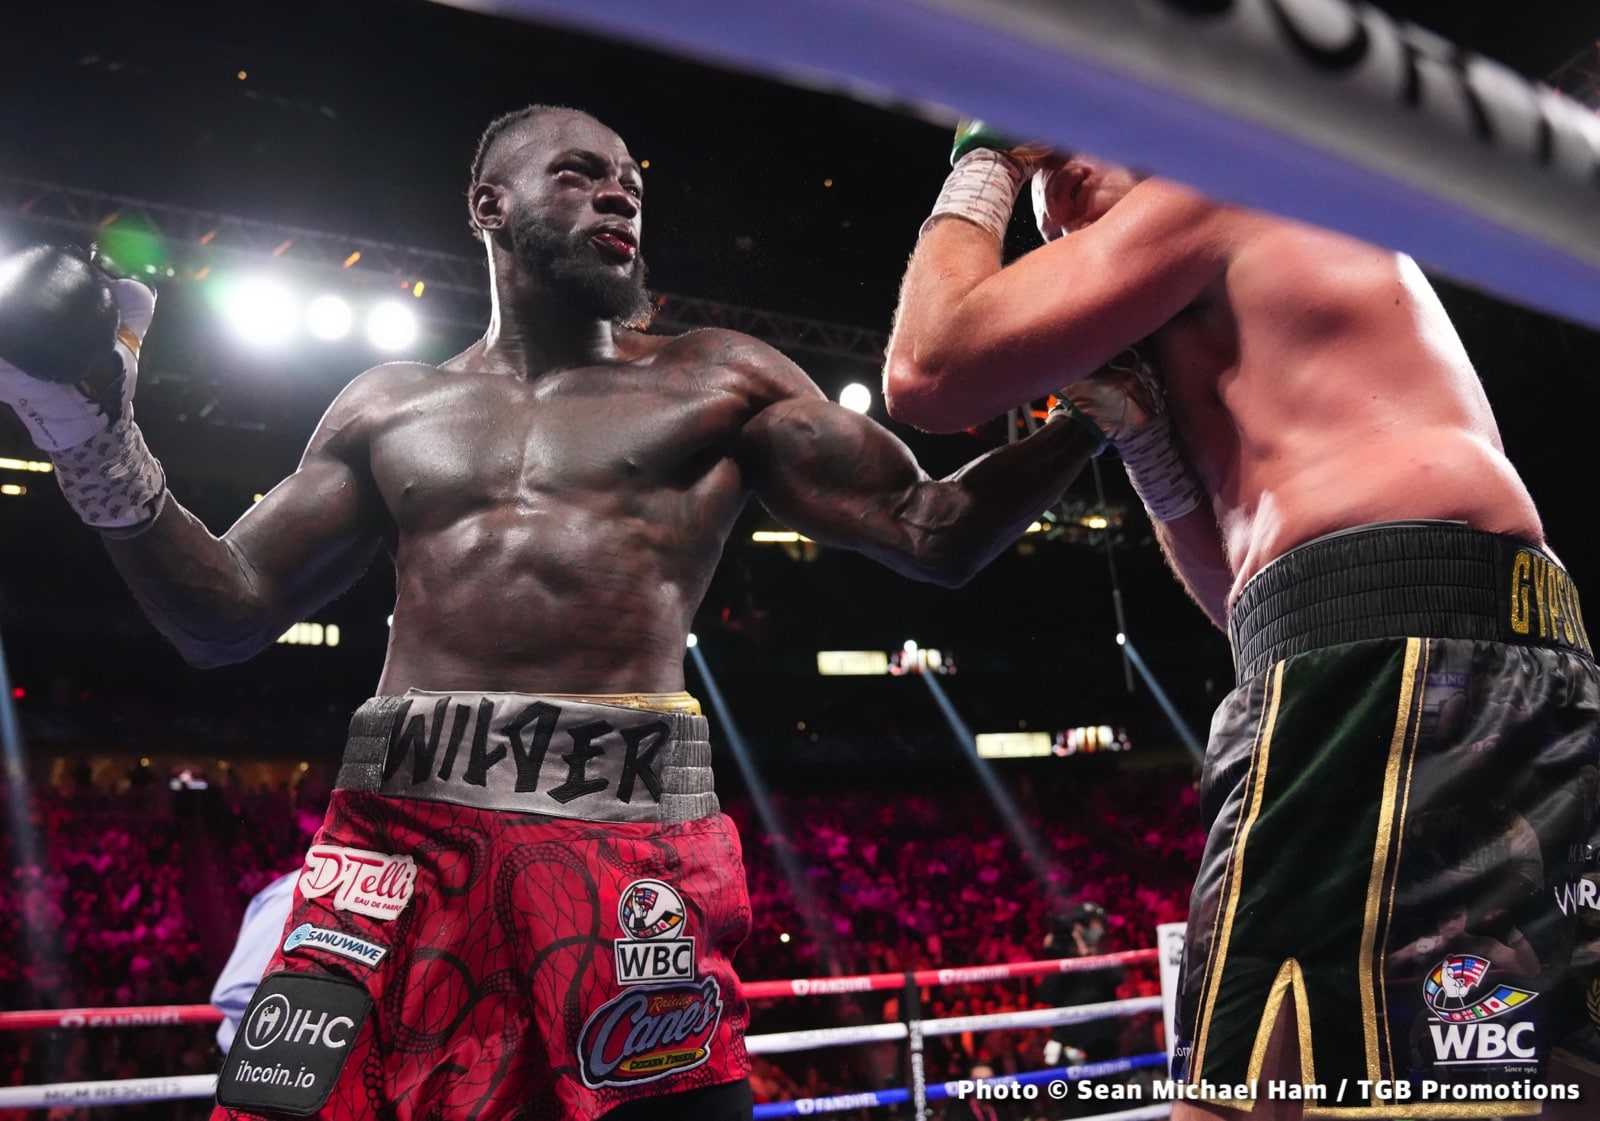 Deontay Wilder boxing news and photos